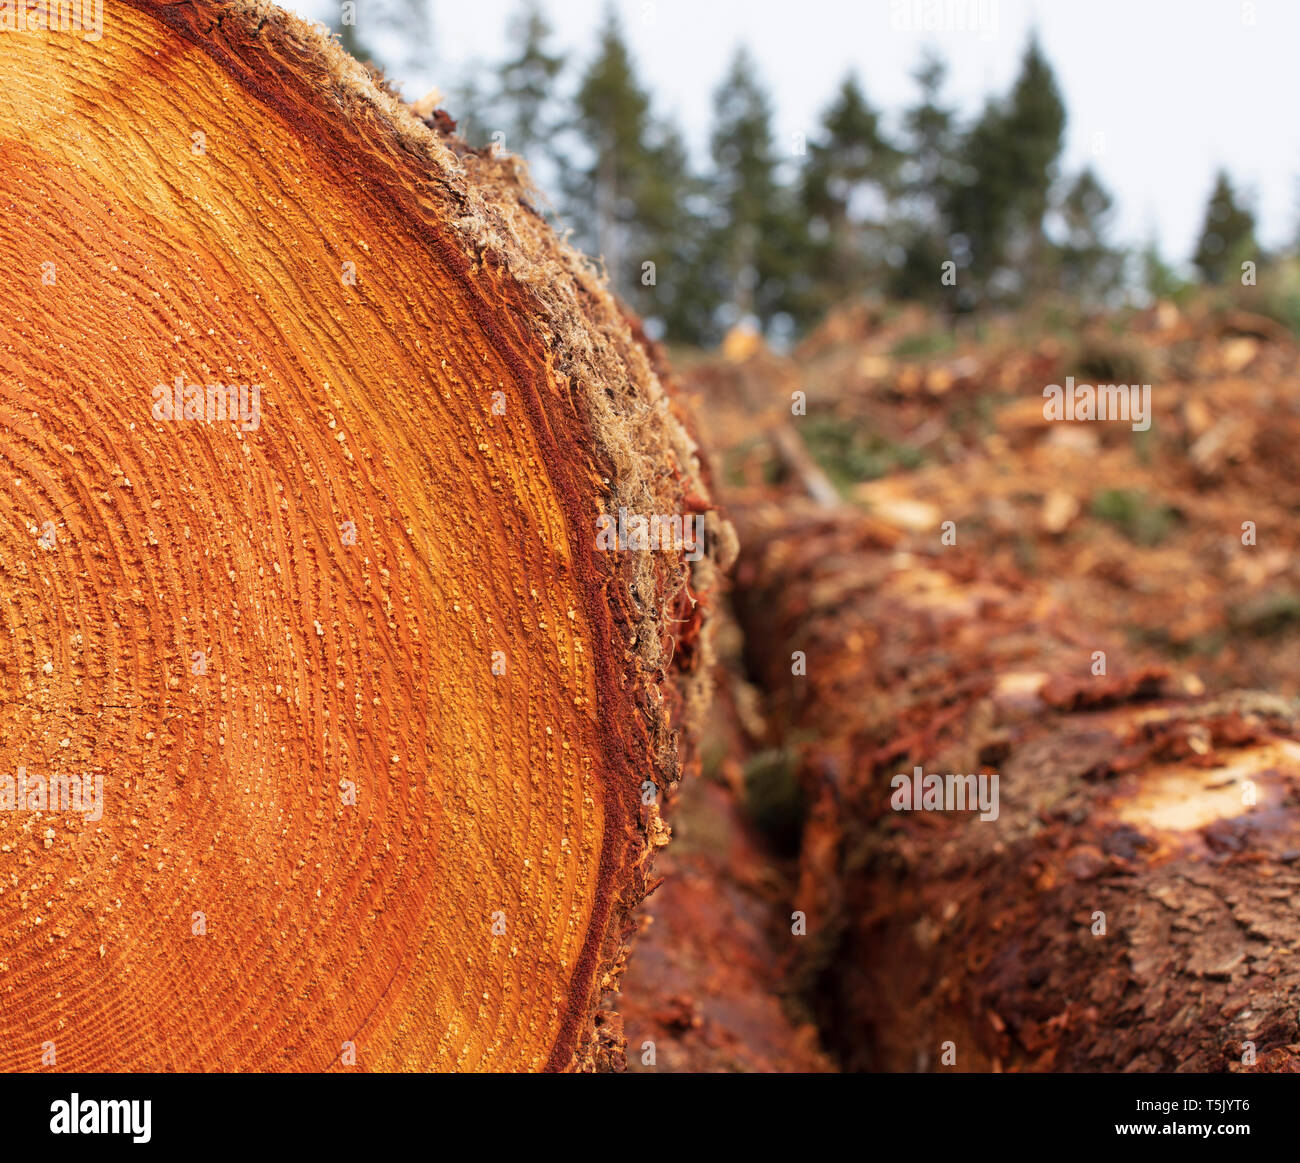 Sawn ends of timber logs, cut wood, with wood grain pattern. Stock Photo